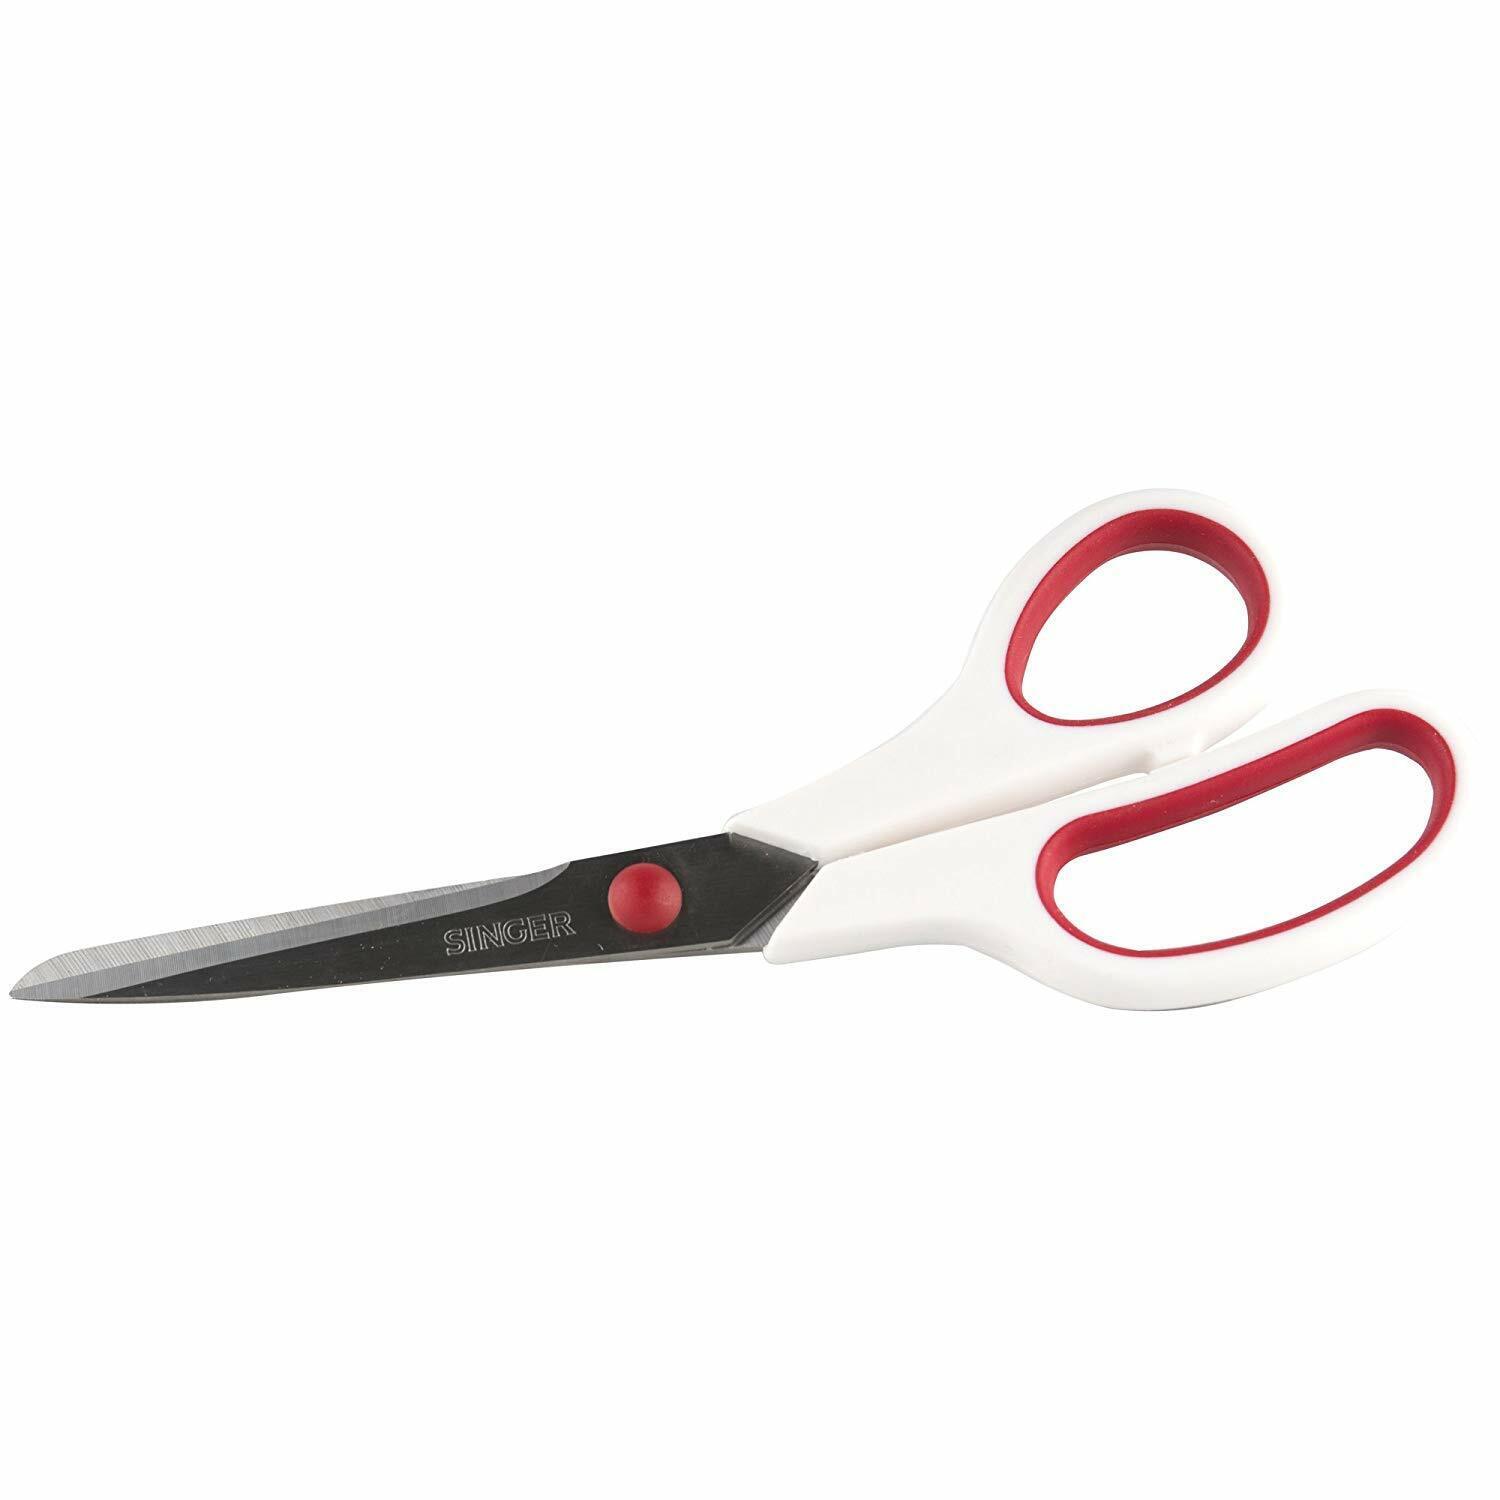 Primary image for SINGER Fabric Scissors with Comfort Grip, 1-pack, Red & White